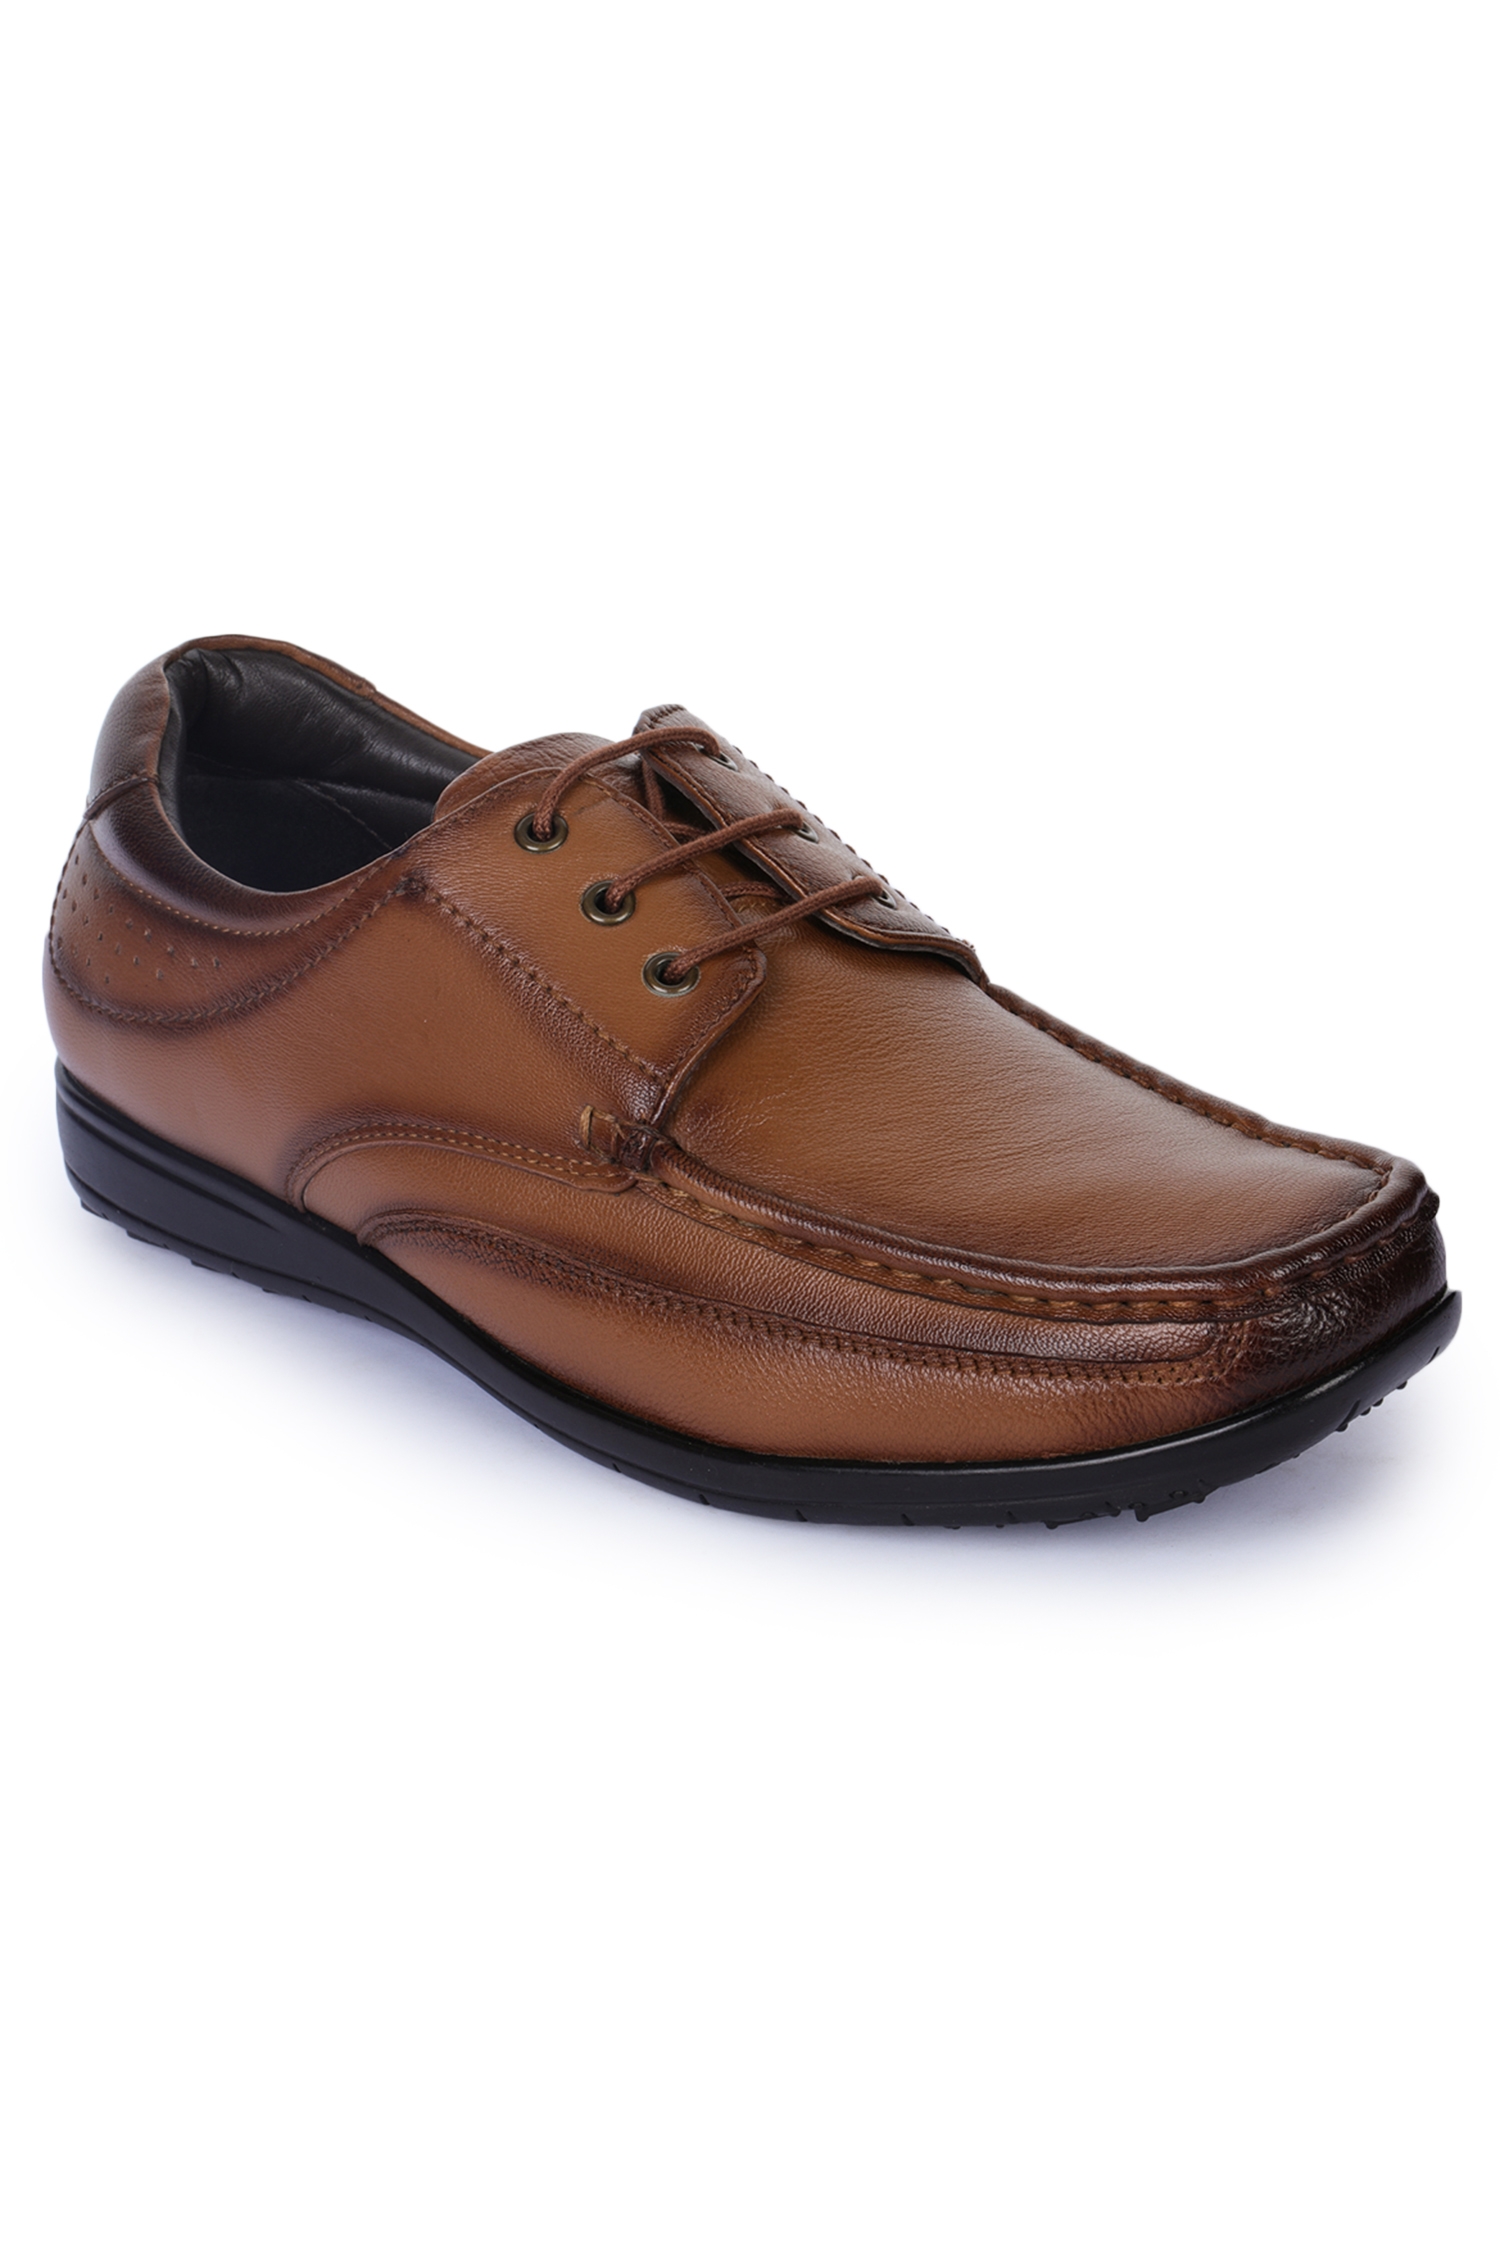 Liberty | Liberty Healers Brown Formal Derby Shoes FL-1414_Brown For - Men